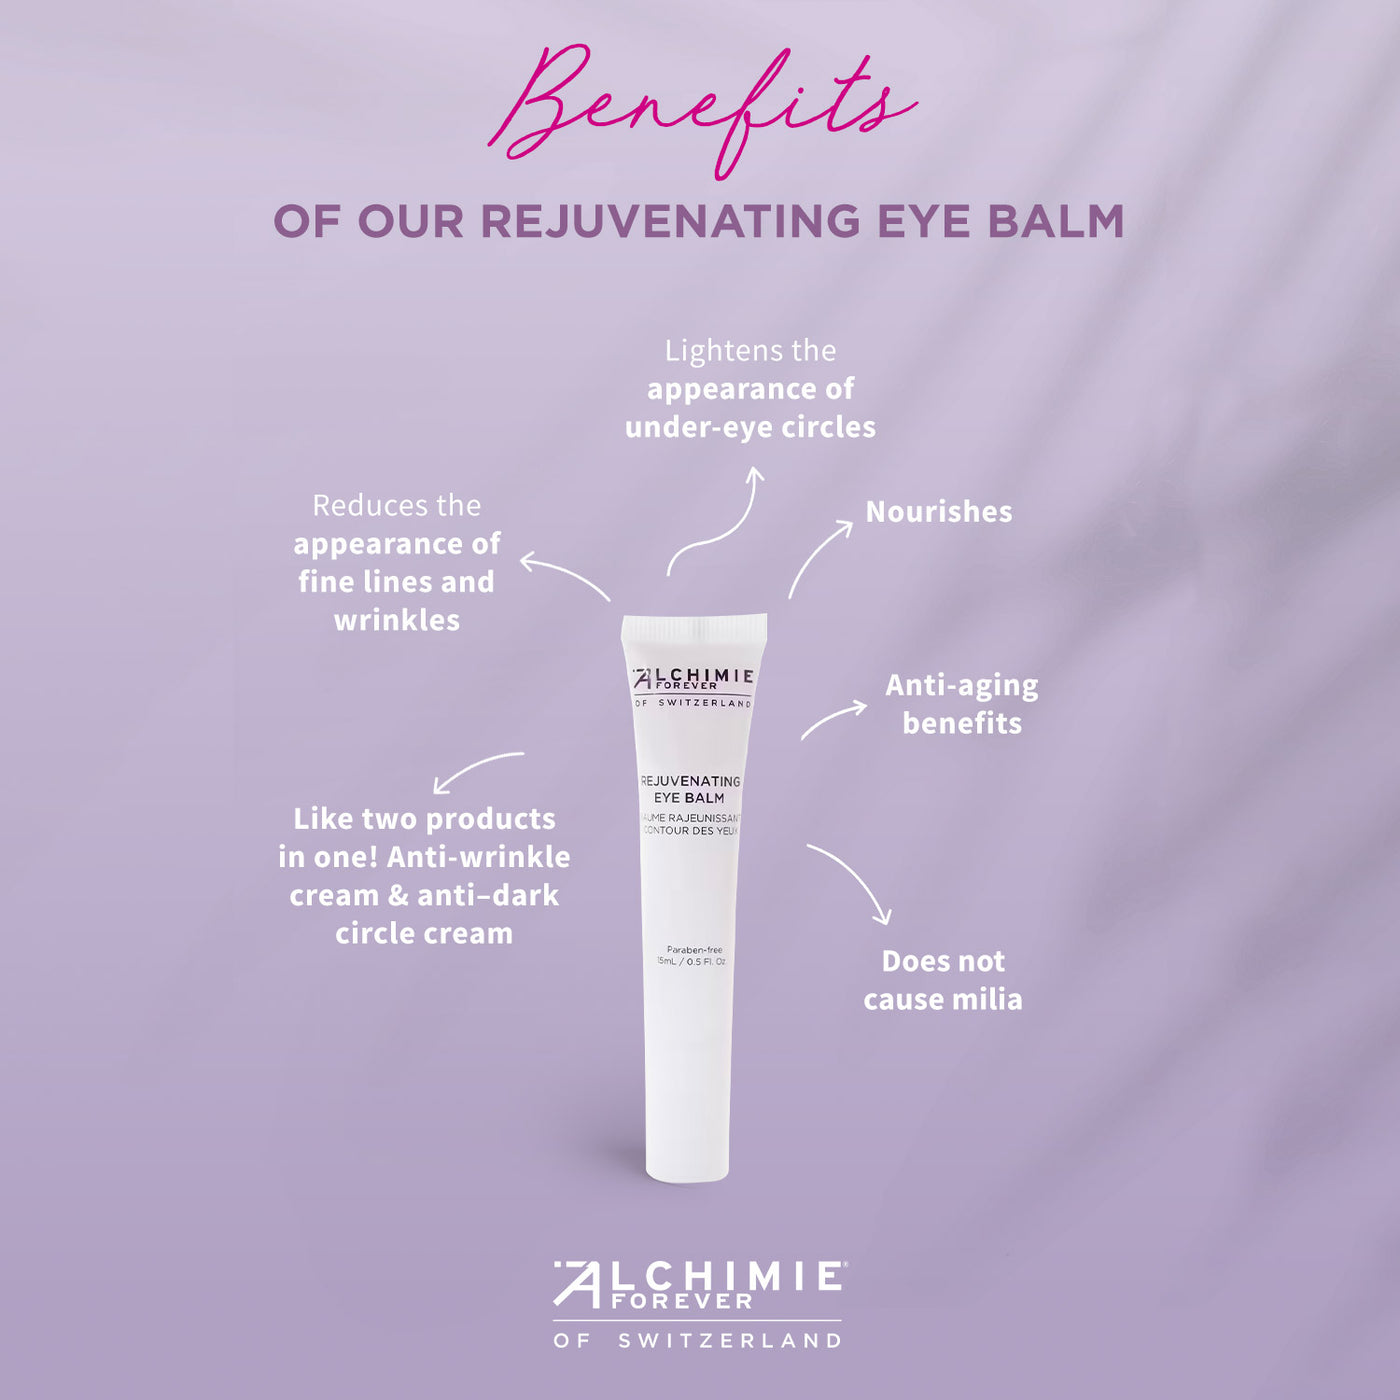 Rejuvenating Eye Balm Benefits.  Anti-aging, reduces the apparance of dark circles and fine lines and wrinkles.  